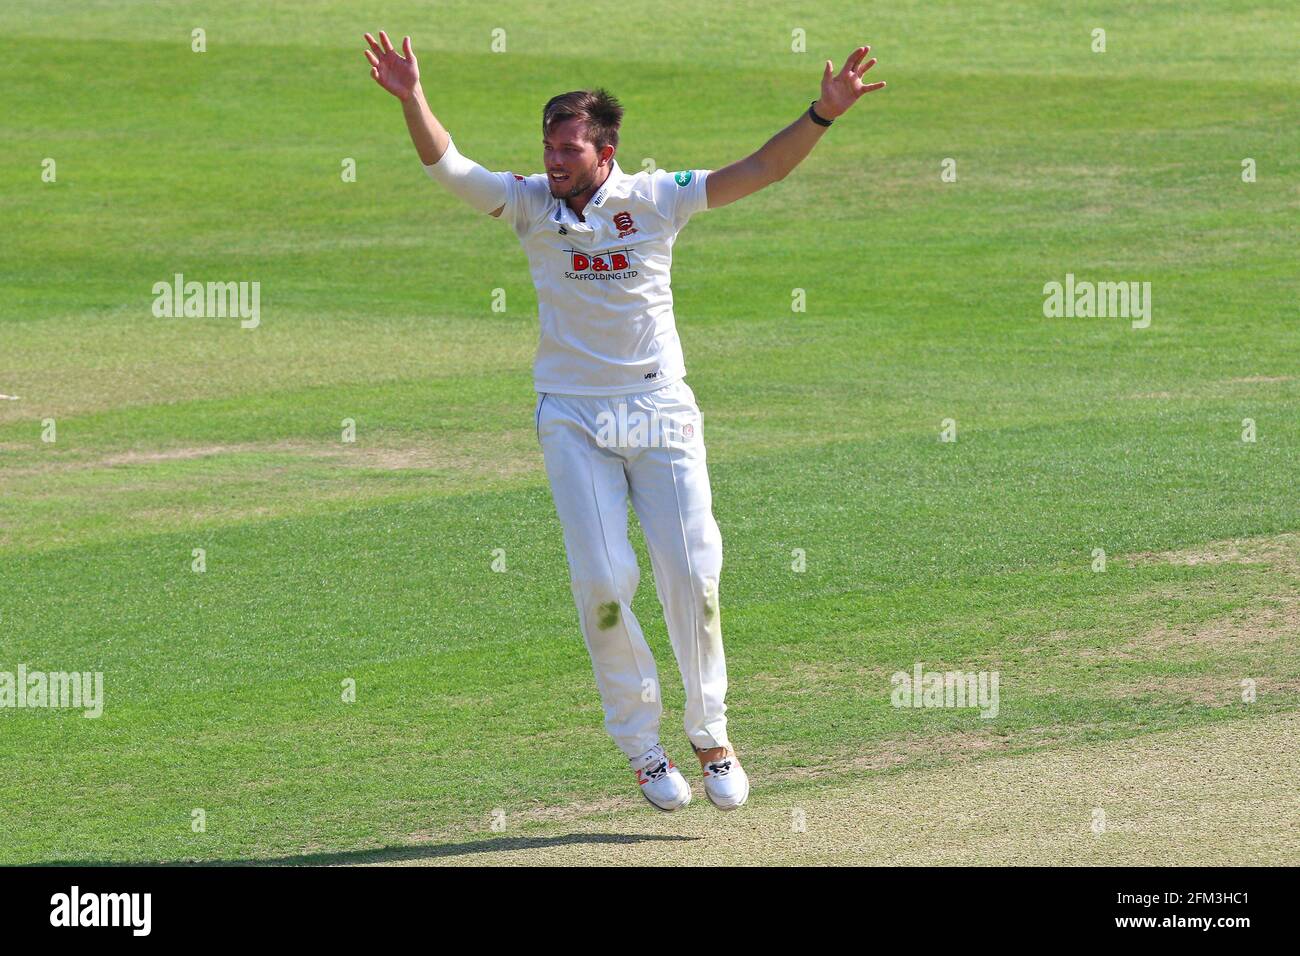 Tom Moore of Essex claims the wicket of Niroshan Dickwella of Sri Lanka during Essex CCC vs Sri Lanka, Tourist Match Cricket at the Essex County Groun Stock Photo